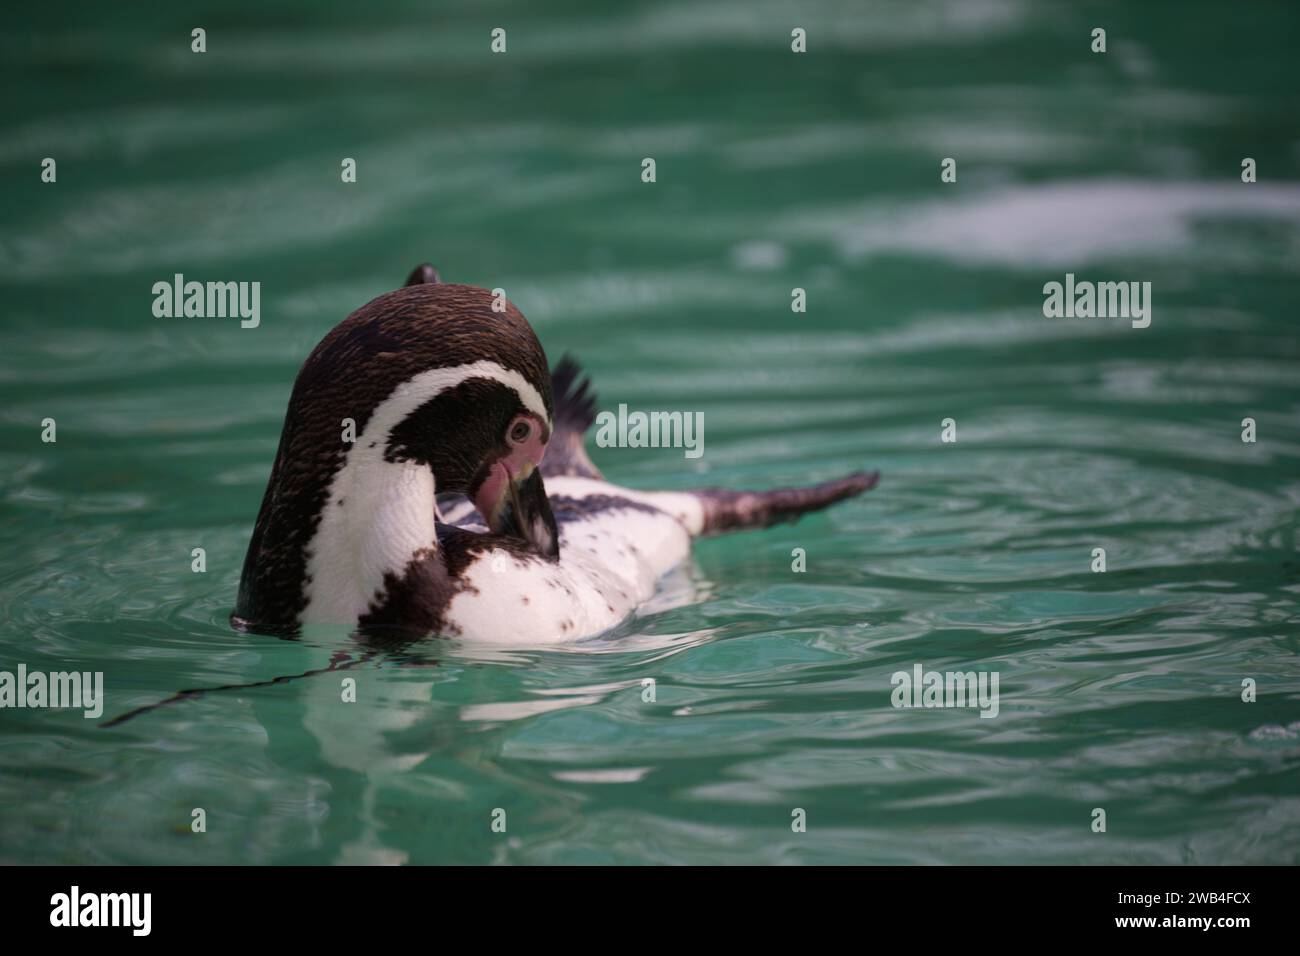 A Humboldt penguin swimming and cleaning itself at London Zoo Stock Photo